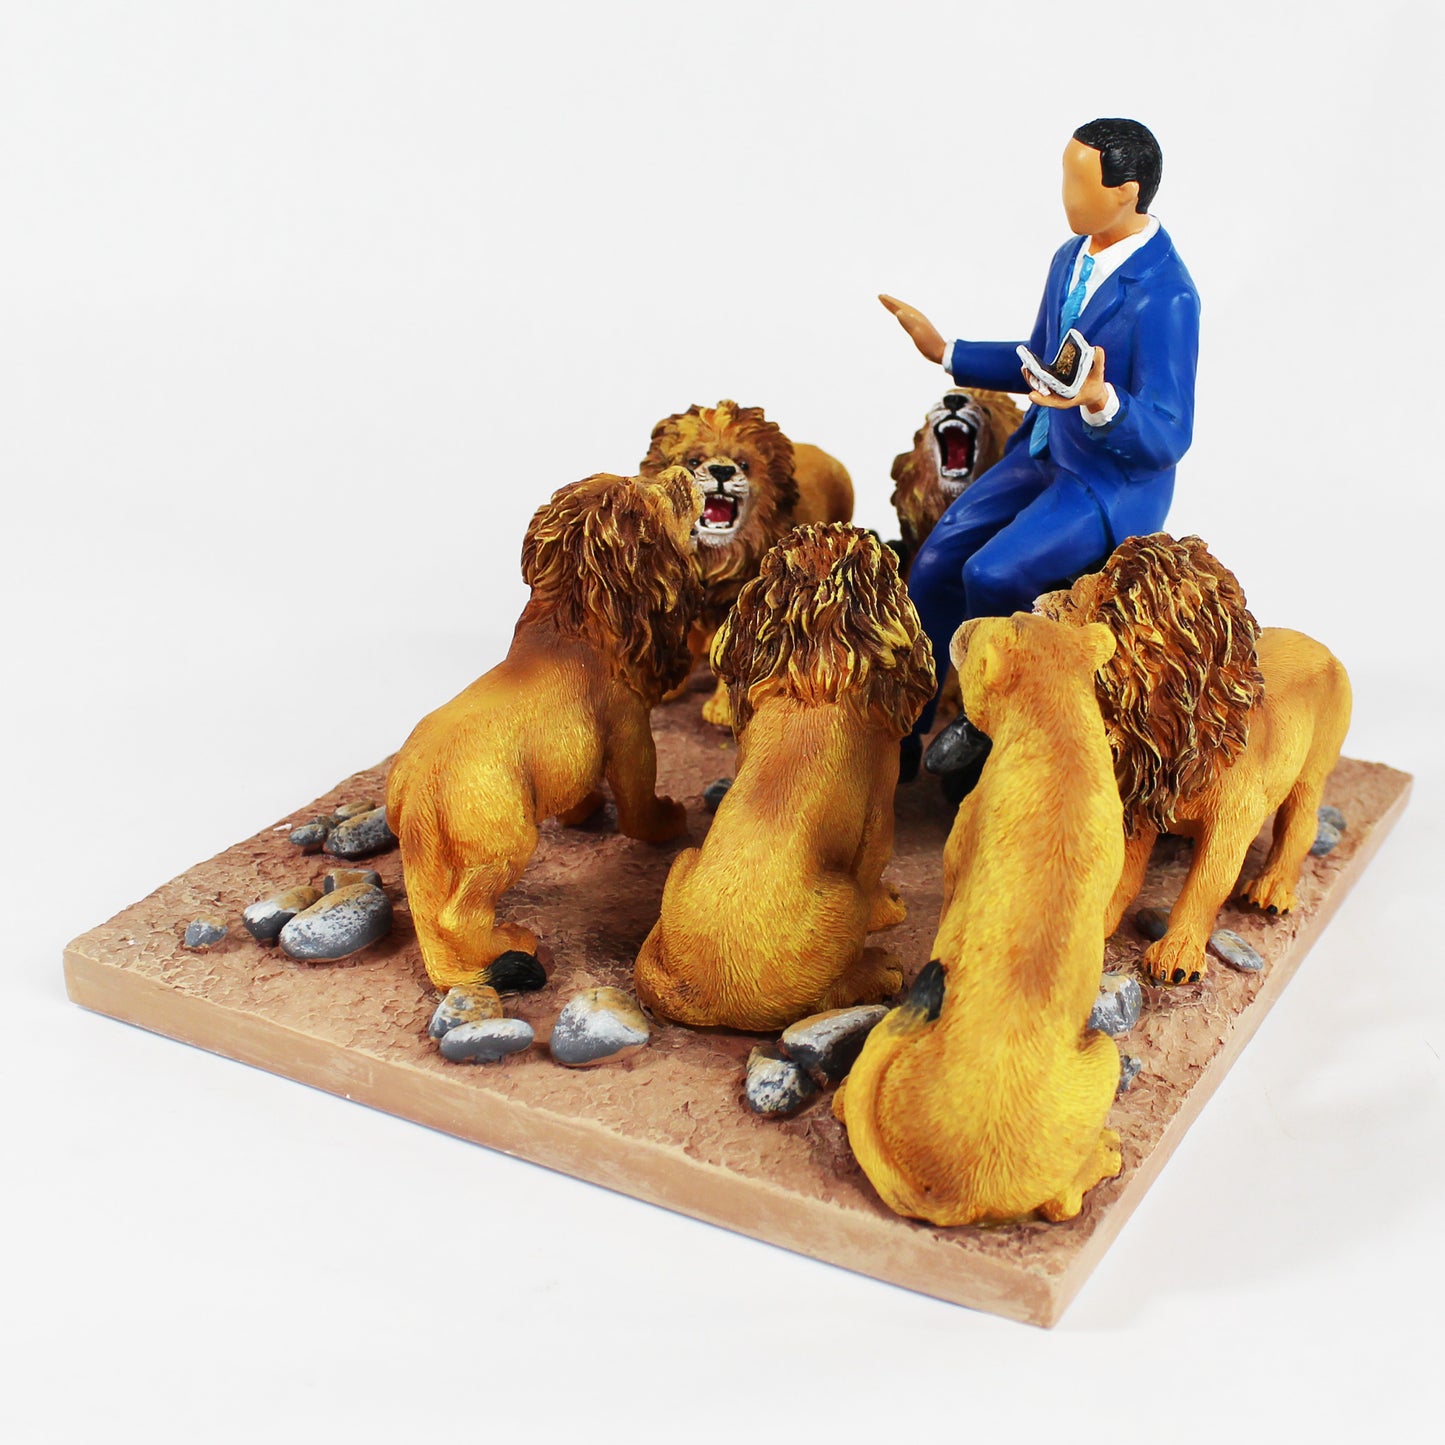 President Obama In The Lion's Den figurine. President sitting on a stump surrounded by six fierce lions - side